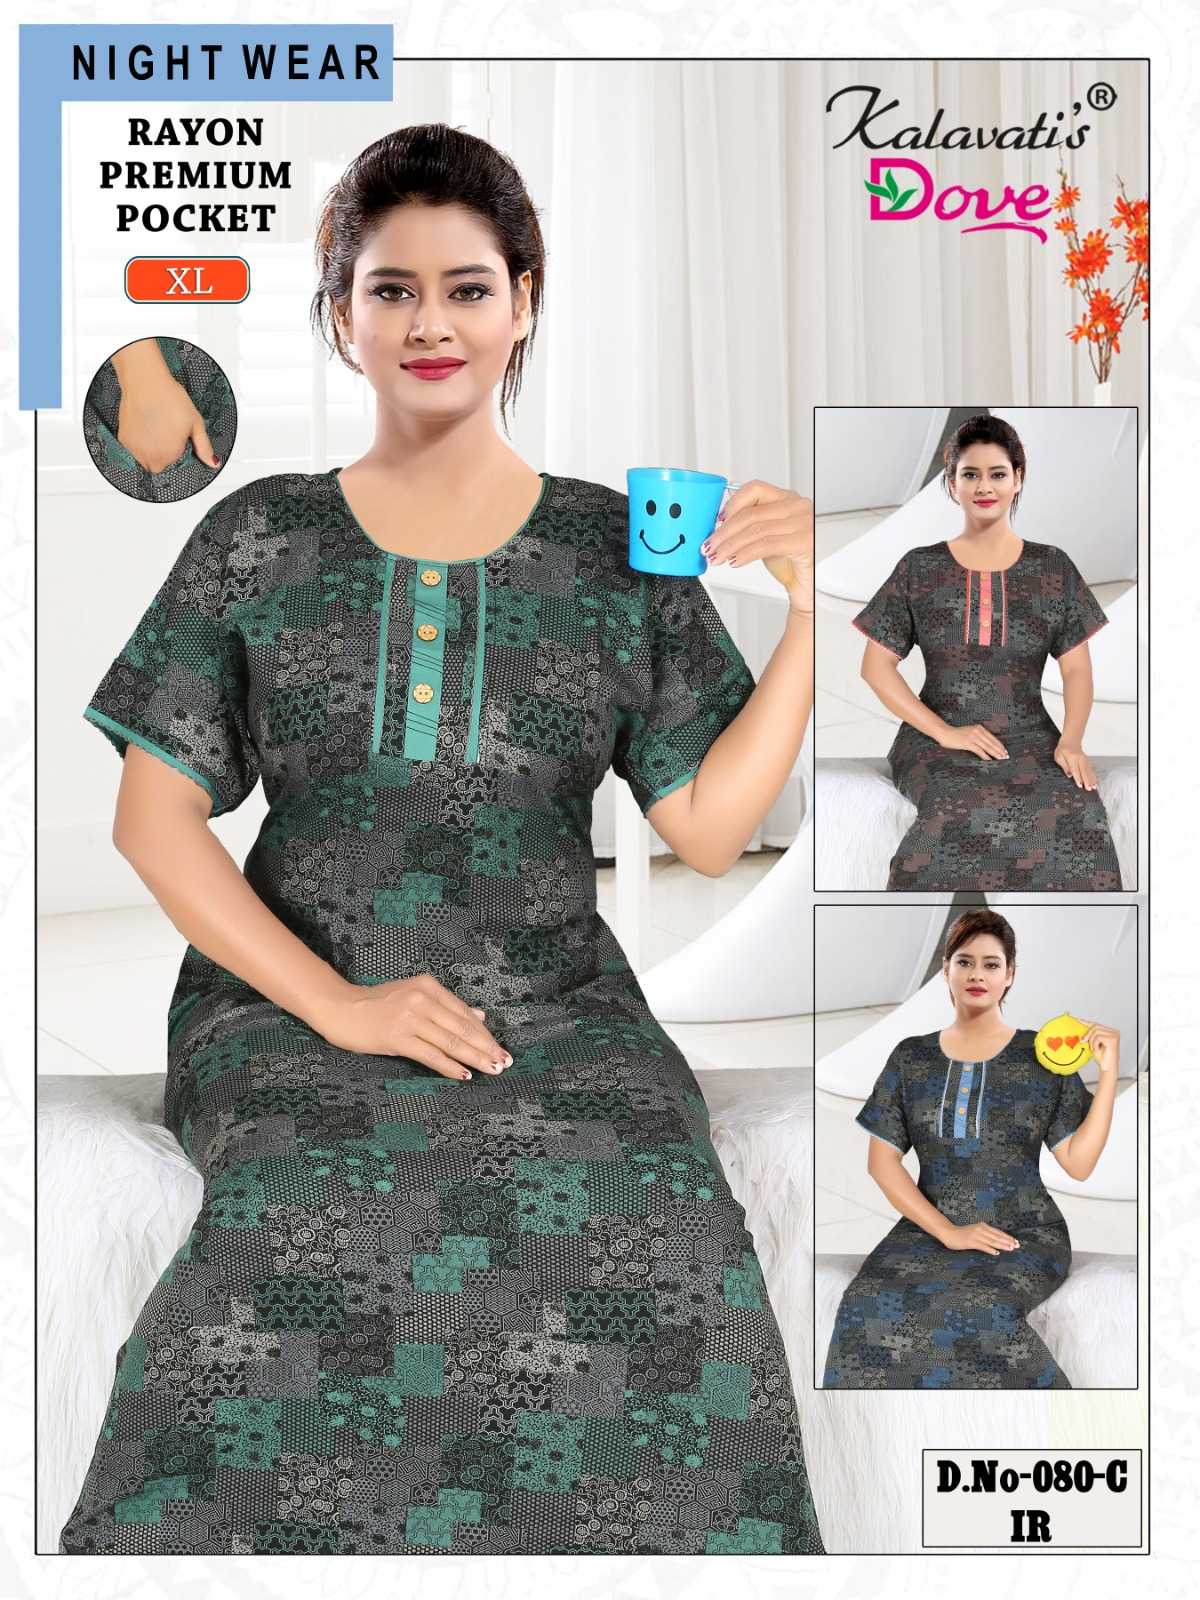 kalavati dove fancy daily wear rayon with pocket women nighty collection at best price